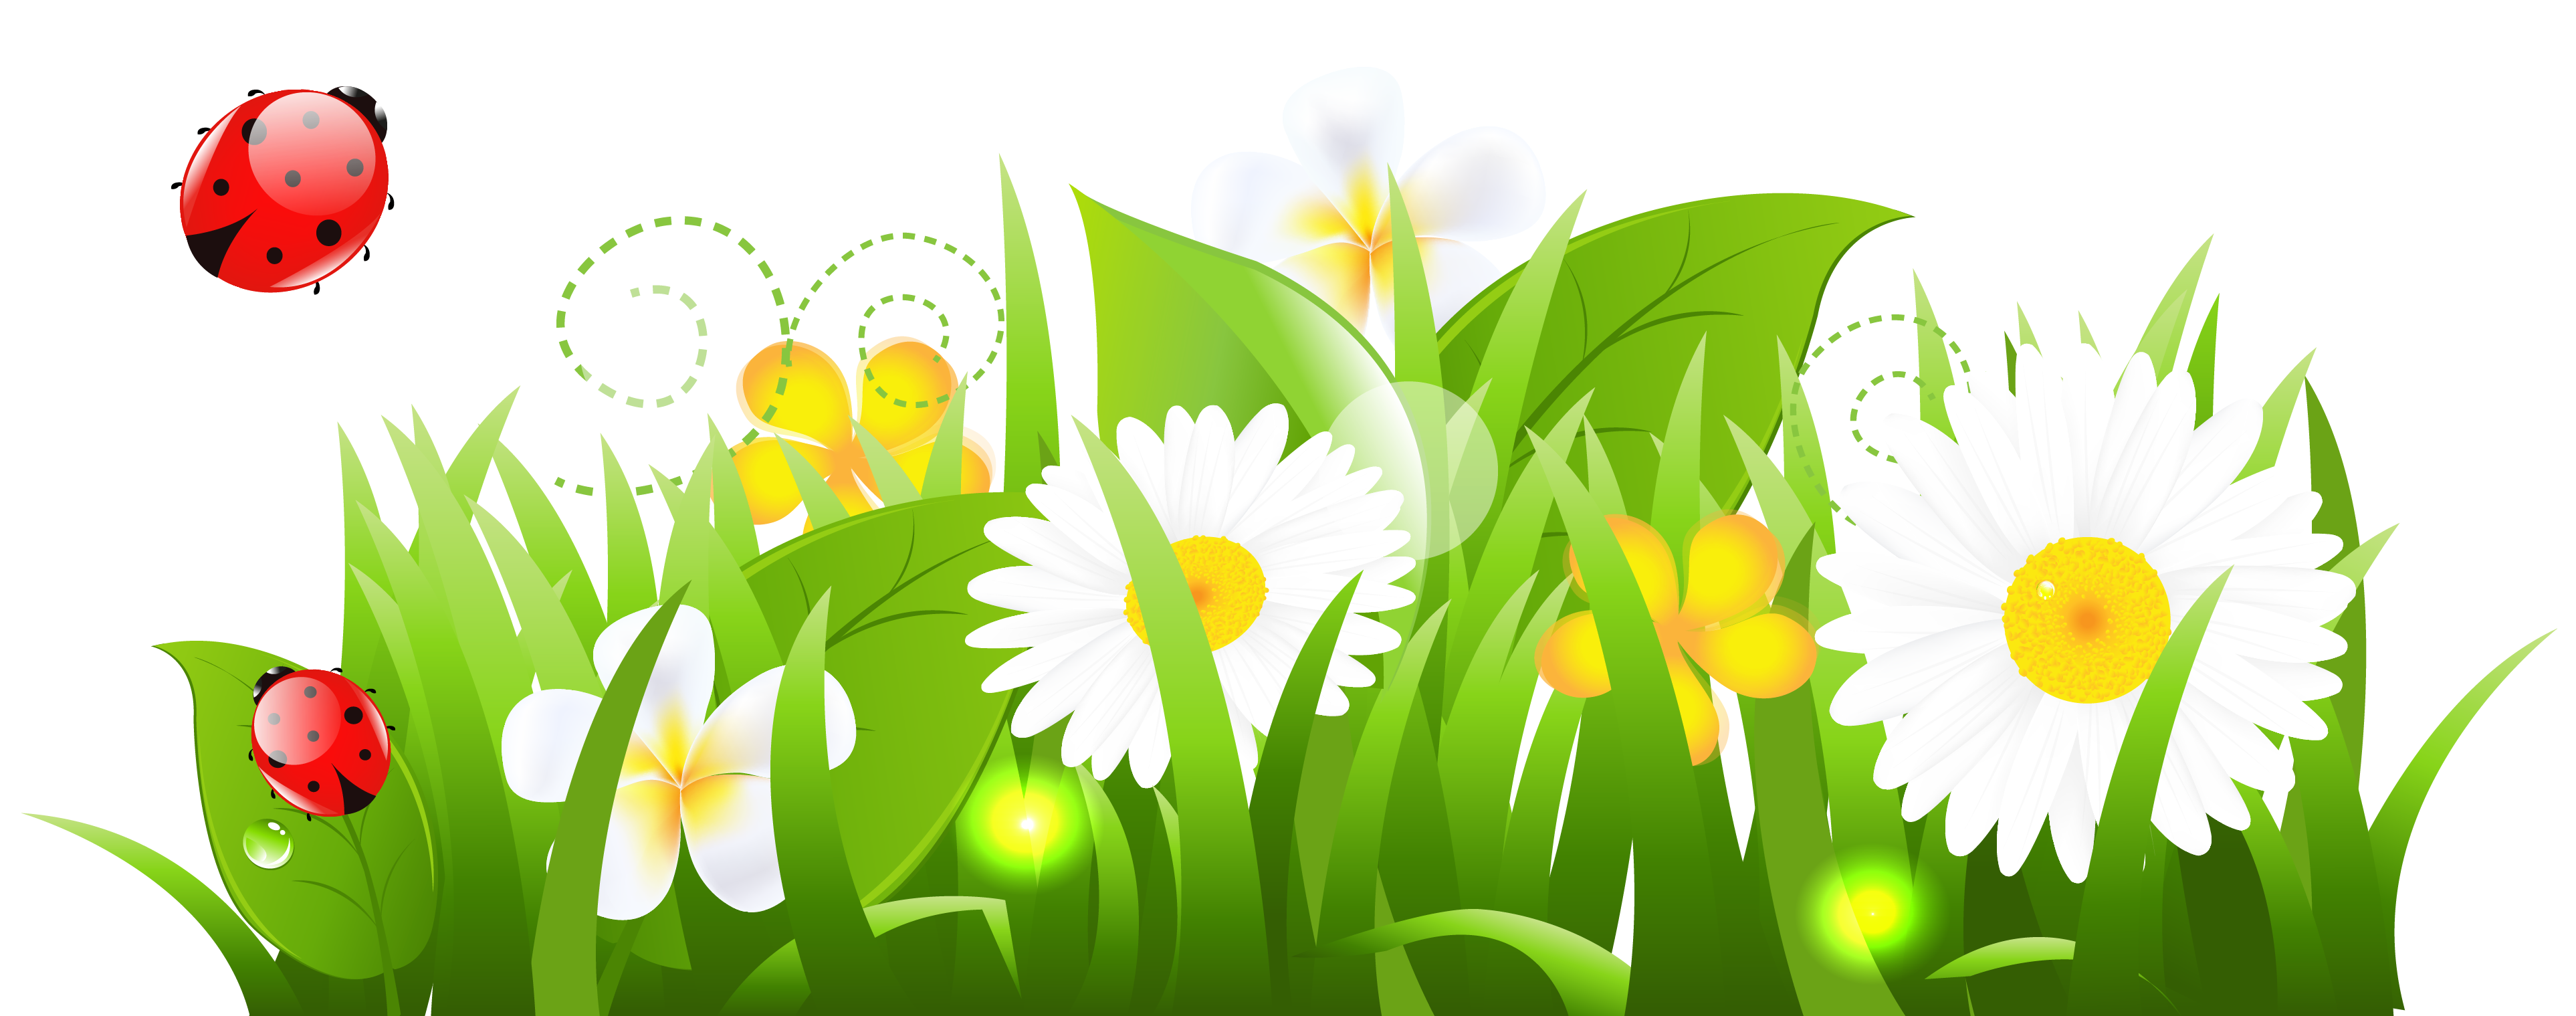 flowers clipart free download - photo #43